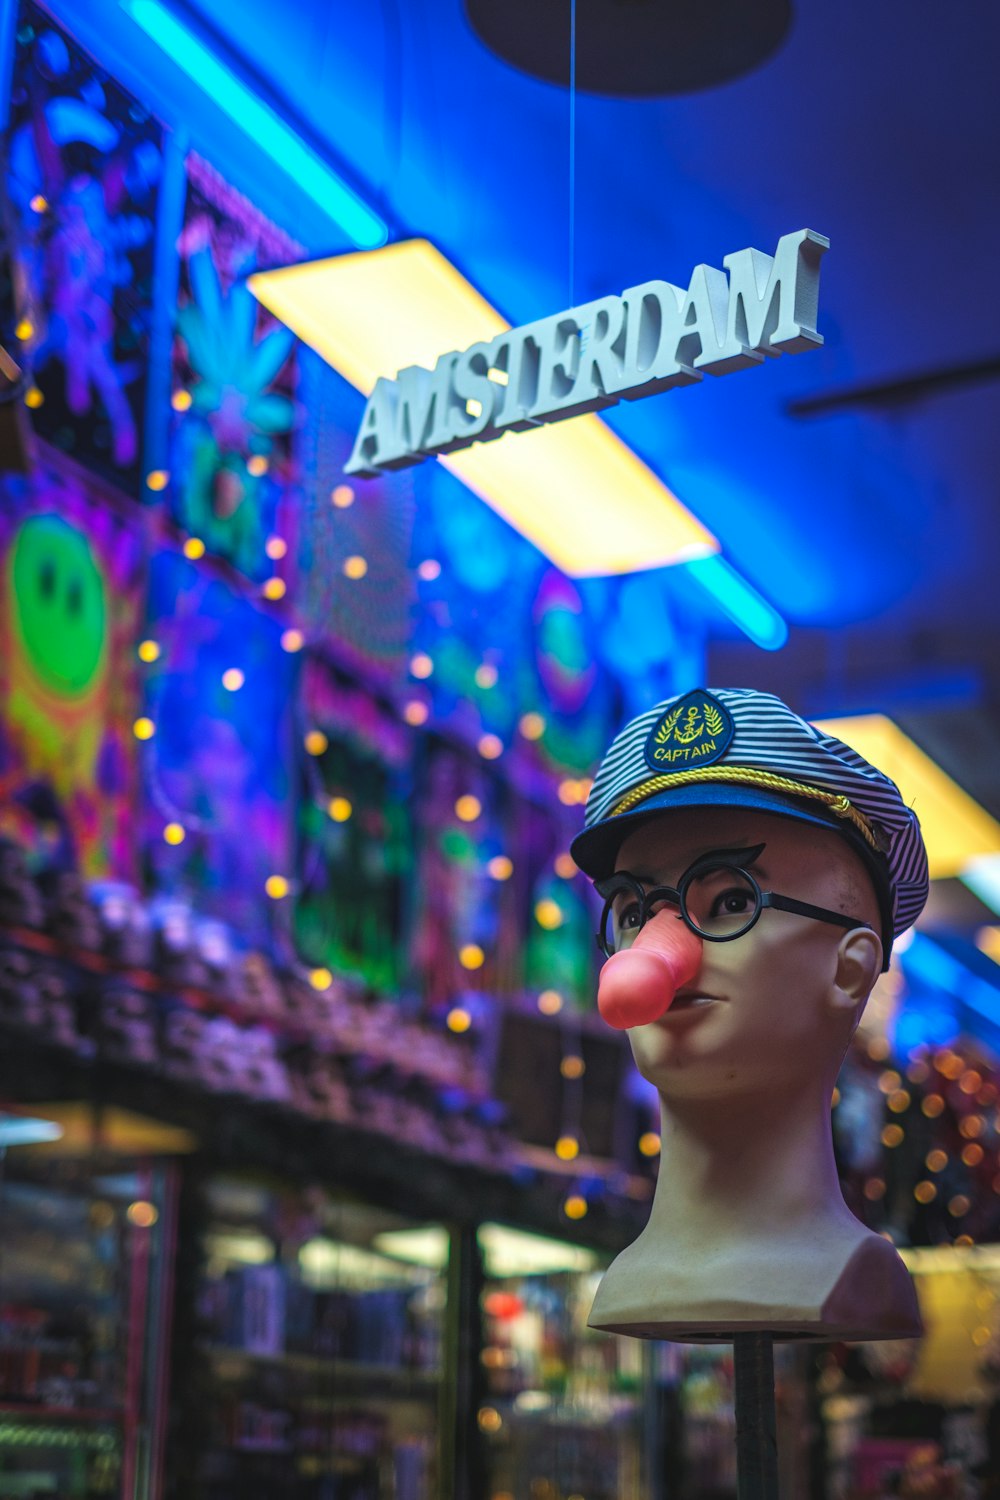 shallow focus photo of mannequin head wearing blue hat